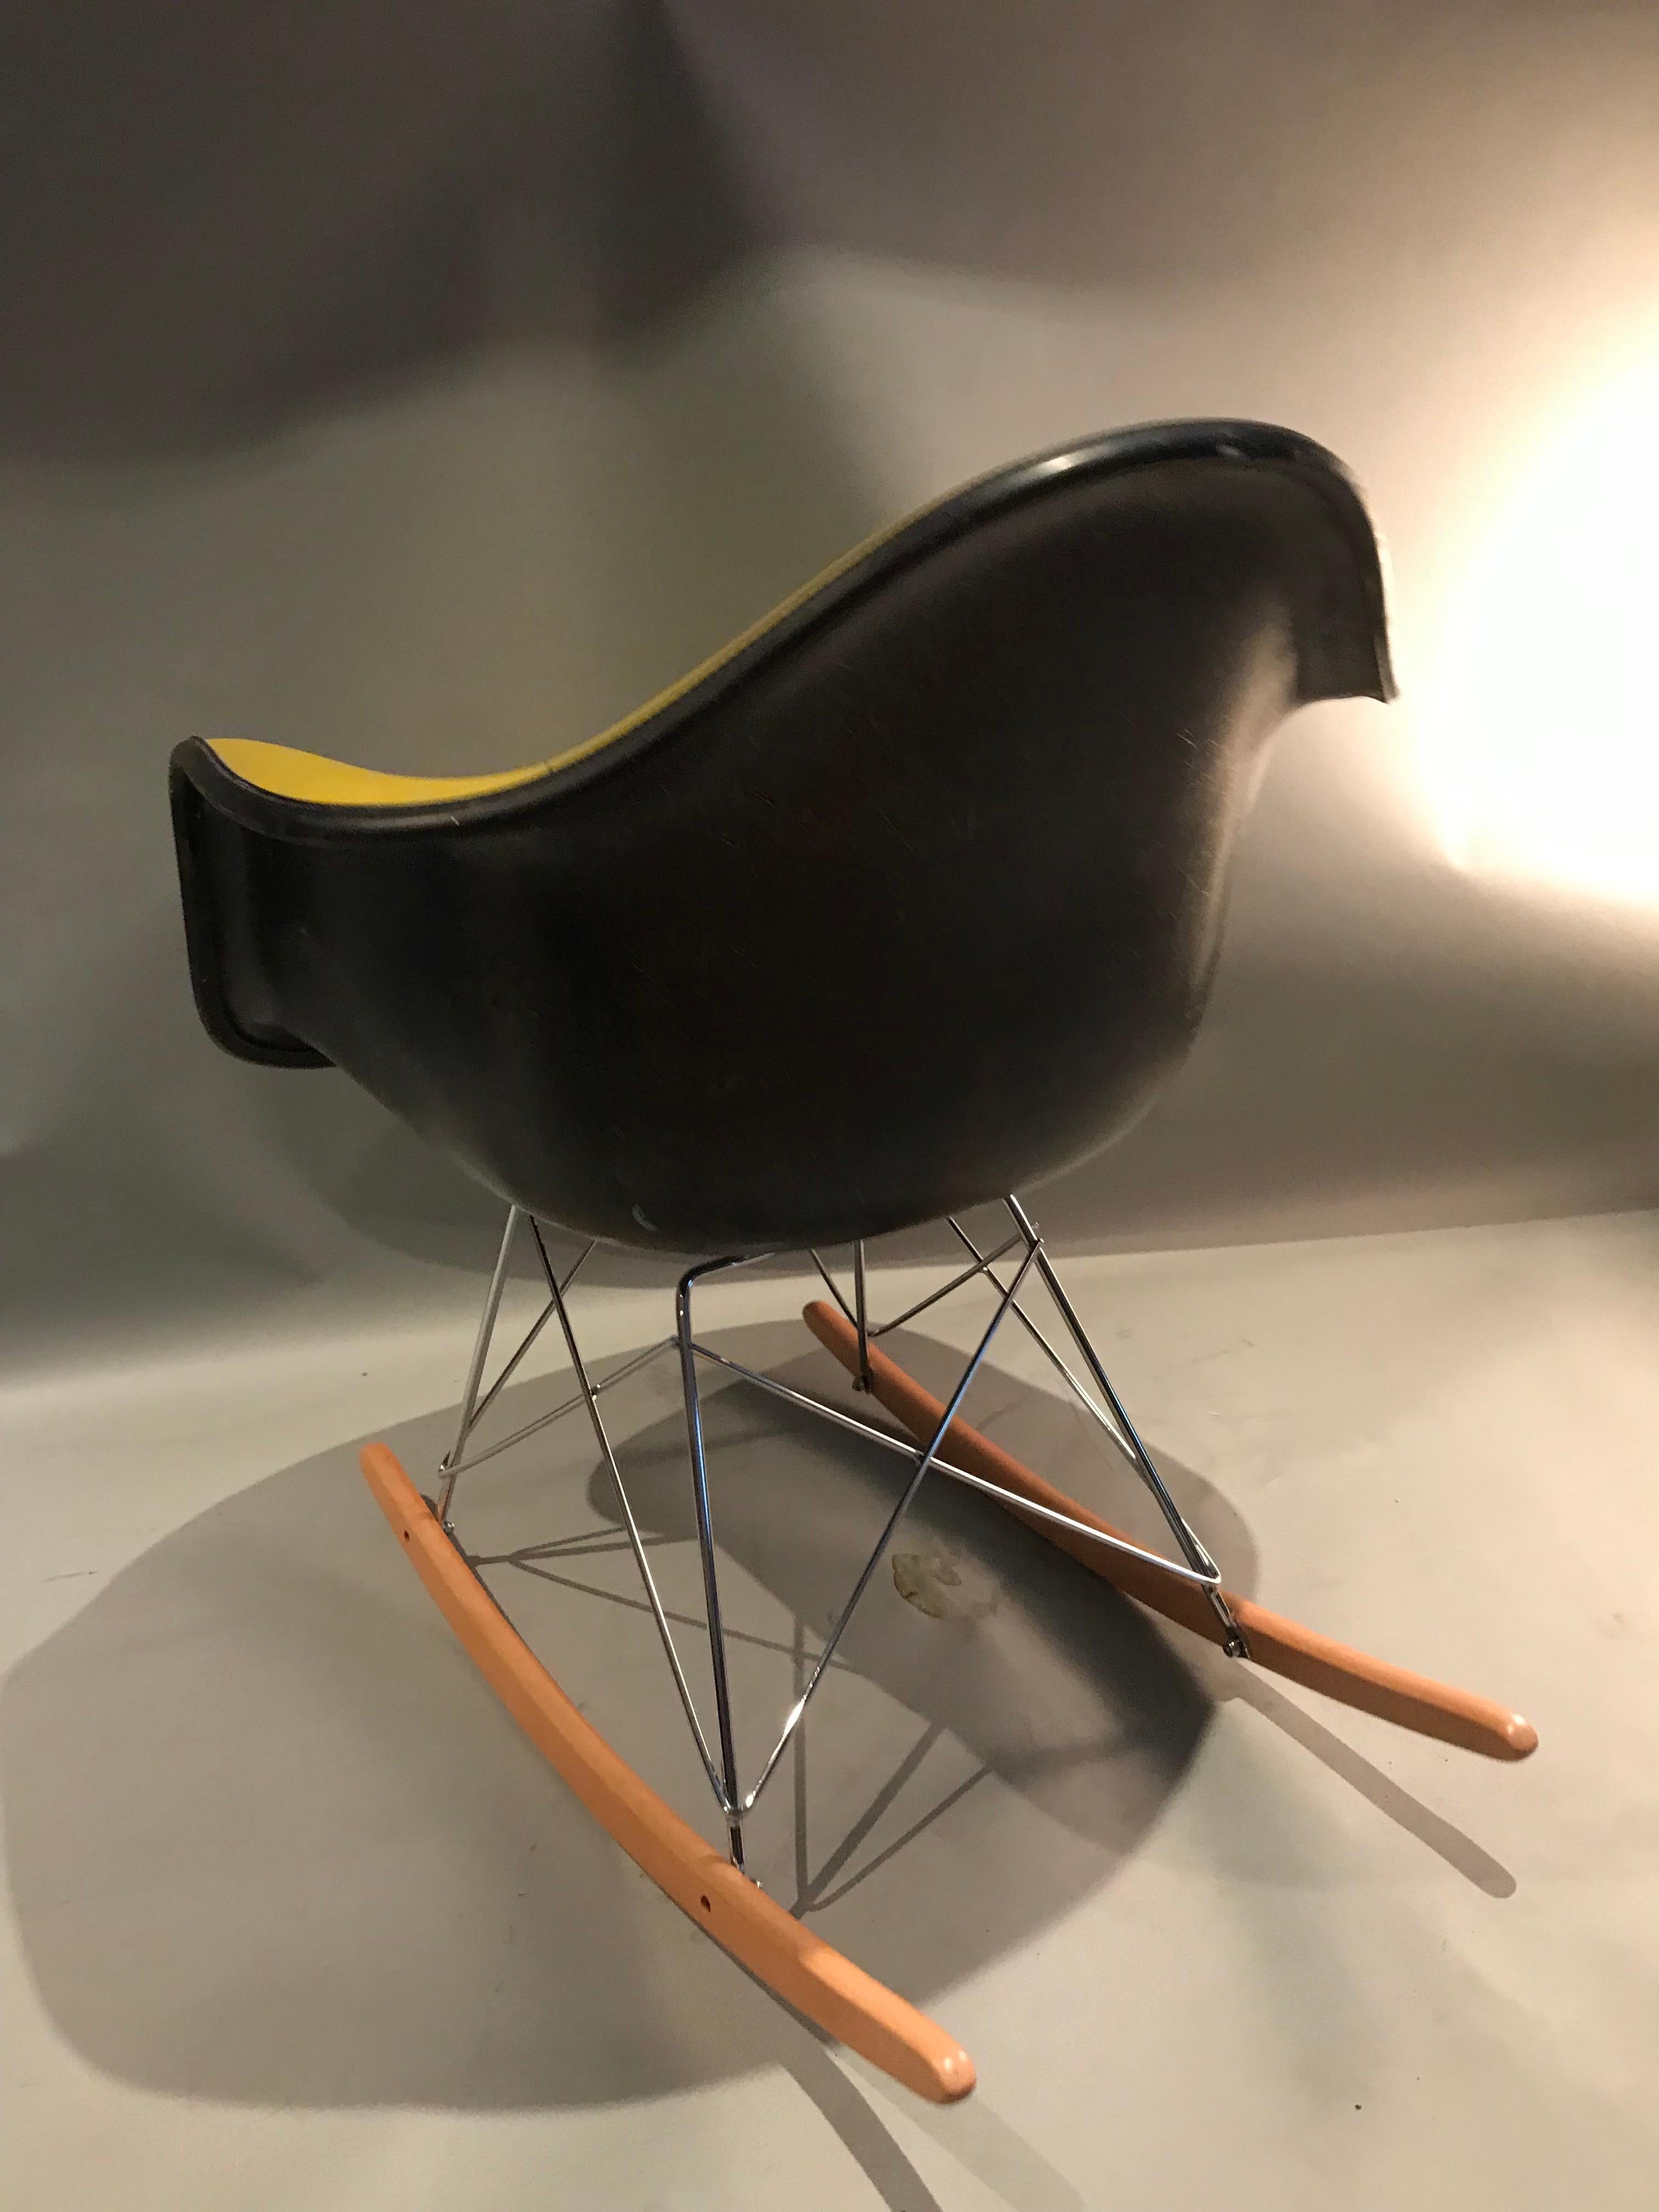 Beautiful Herman Miller Eames fiberglass rocking chair. Herman Miller stamped shell with yellow Naugahyde upholstery. Vintage shell circa 1960s-1970s with newer base.